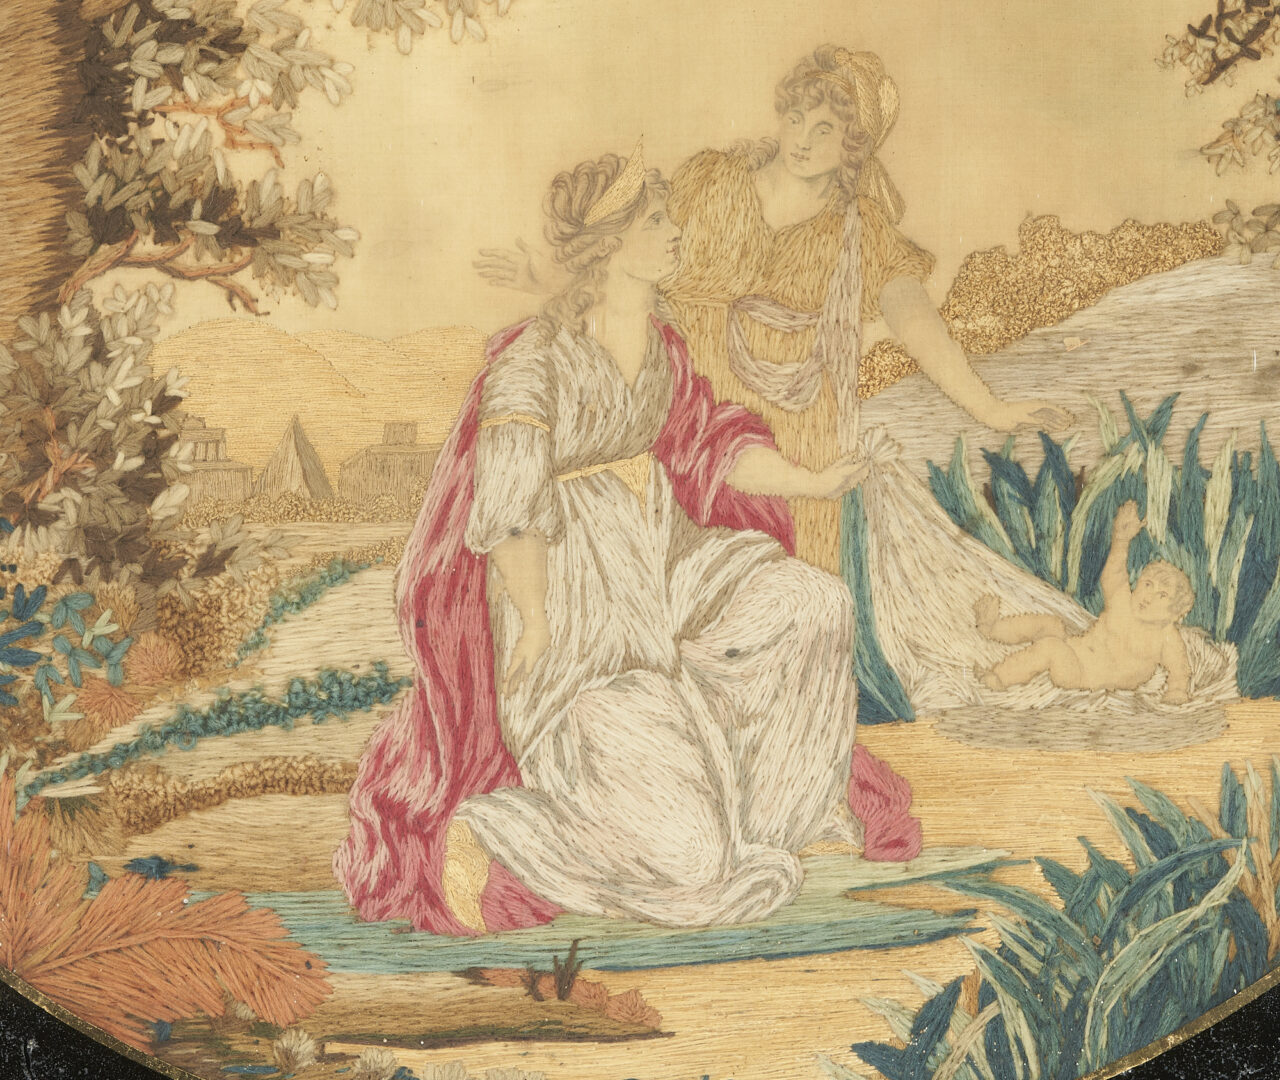 Lot 303: Silk Embroidered Needlework Picture: Moses in Basket